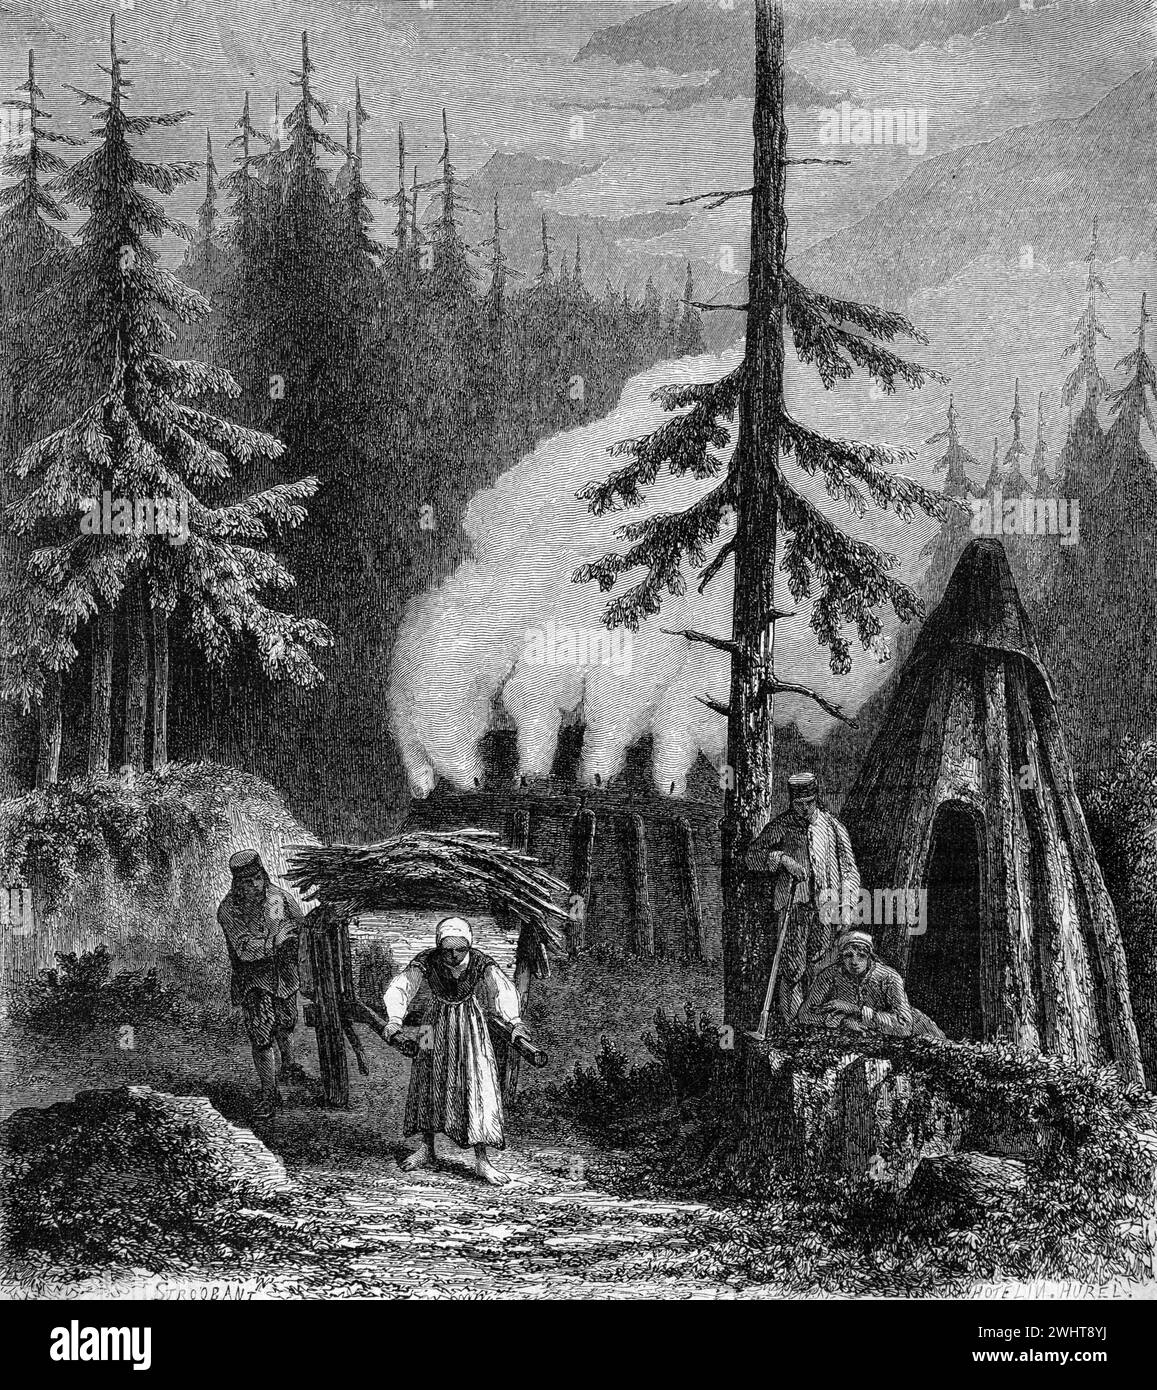 Charcoal Makers or Charcoal Burners and Charcoal Kilns in the Harz Mountain Forest or Forested Highlands of the Harz Saxony-Anhalt Germany. Vintage or Historic Engraving or Illustration 1863 Stock Photo